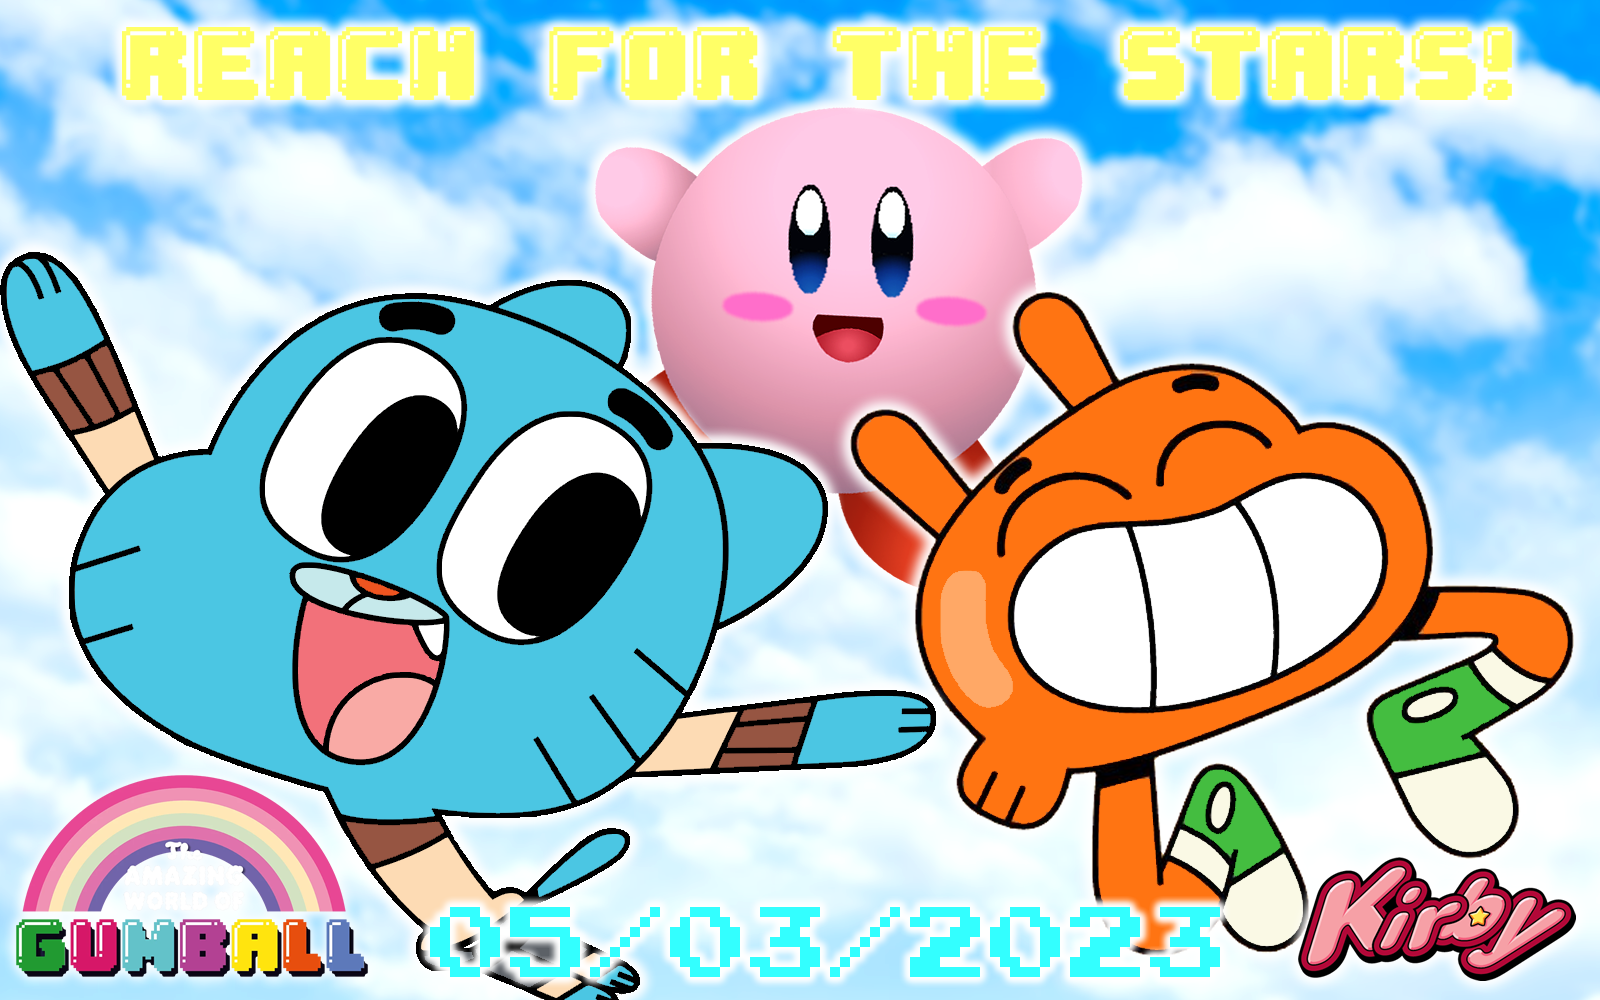 Gumball Watterson 2nd Official Artwork by Evilasio2 on DeviantArt